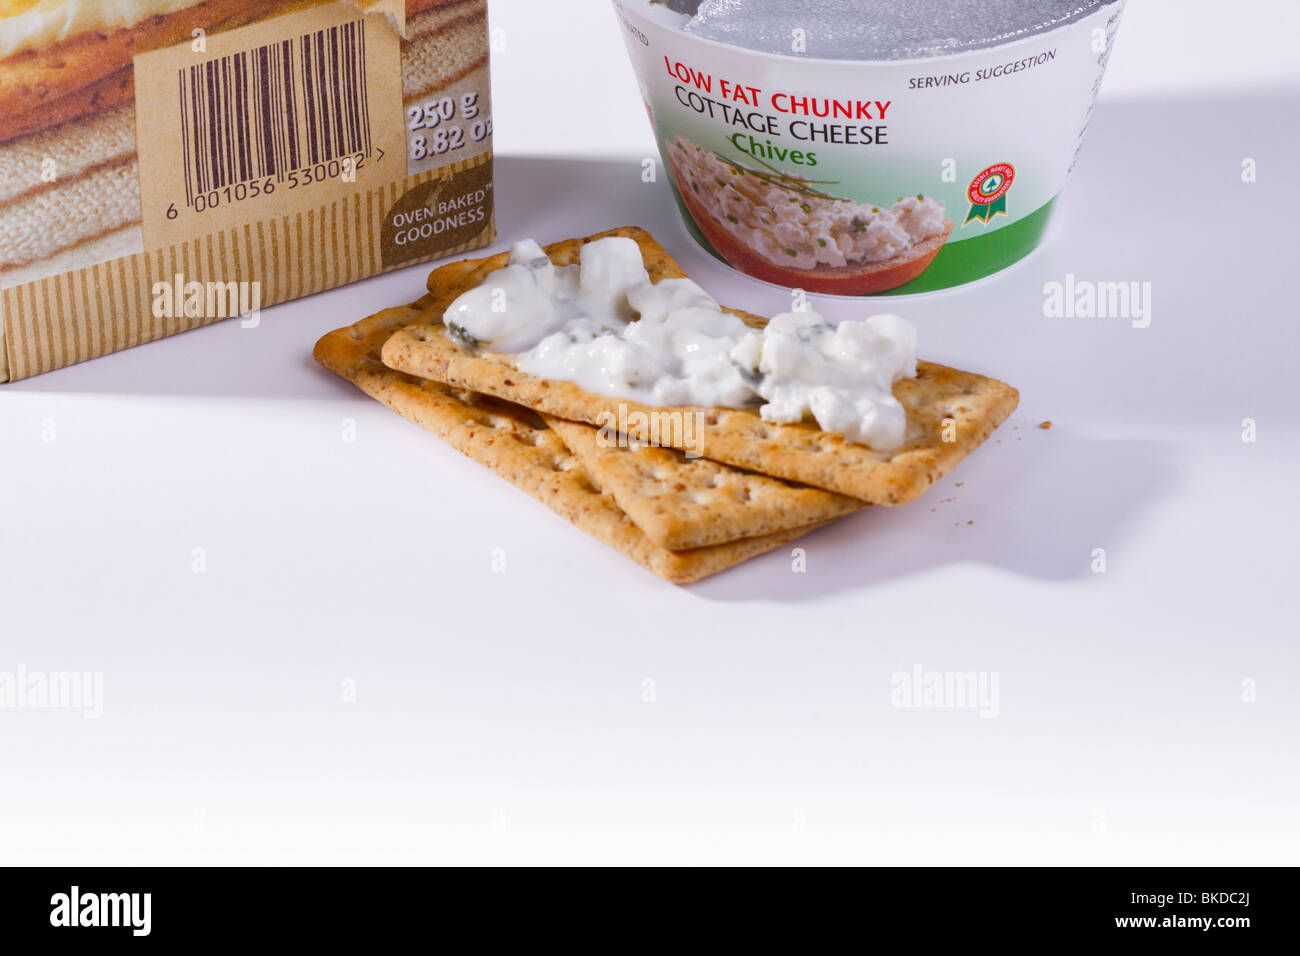 High Fibre Crackers And Low Fat Cottage Cheese Stock Photo